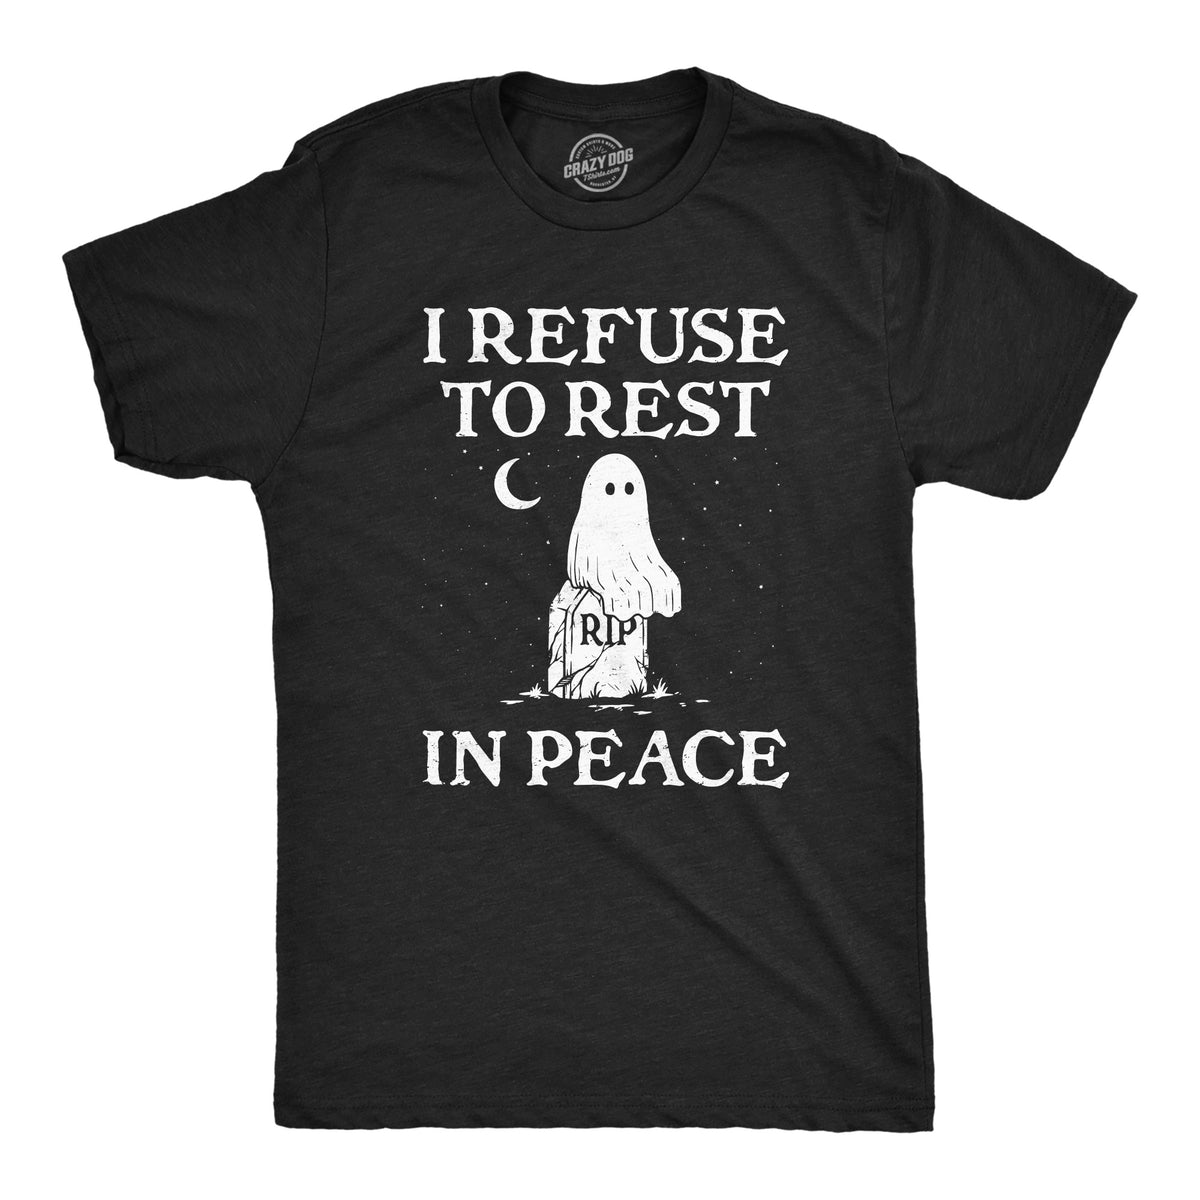 Funny Heather Black - REST I Refuse To Rest In Peace Mens T Shirt Nerdy Halloween sarcastic Tee